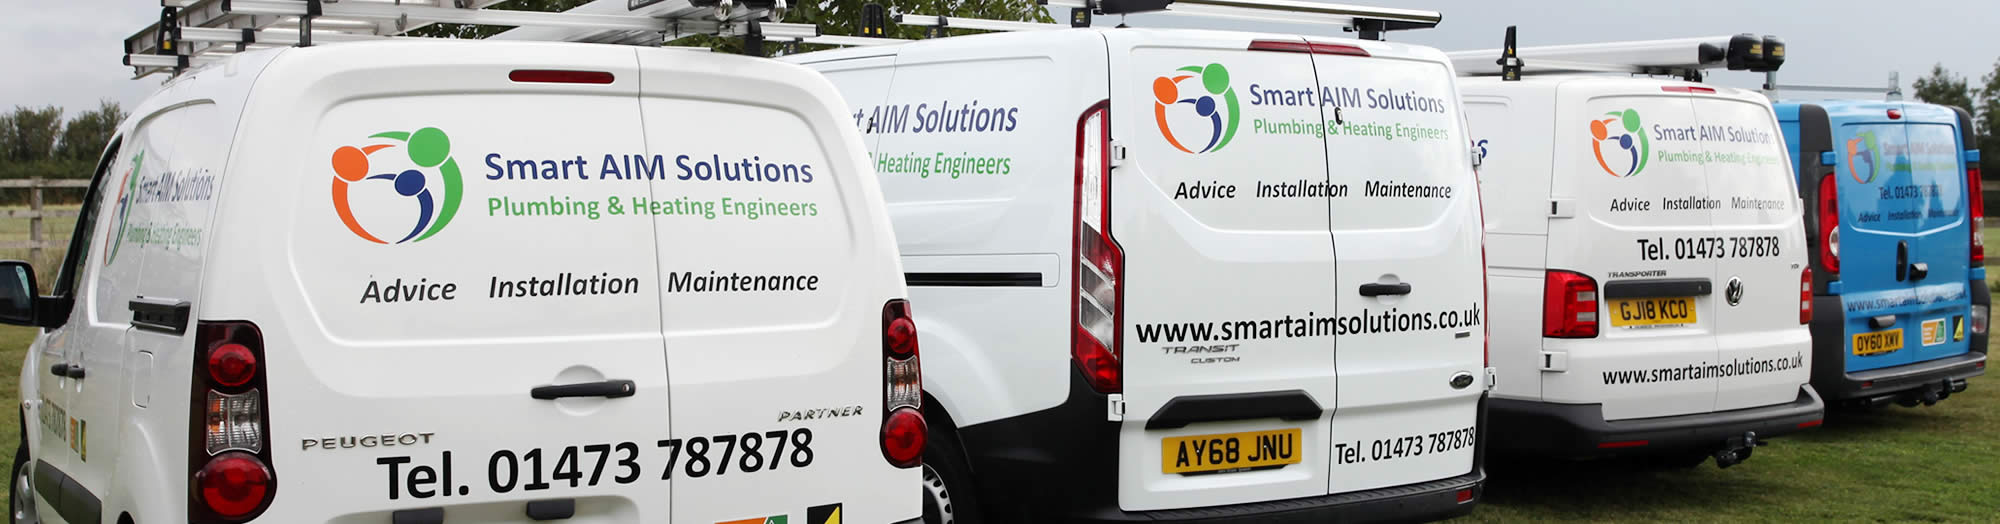 Smart AIM Solutions - Your plumbing, heating and bathroom professionals